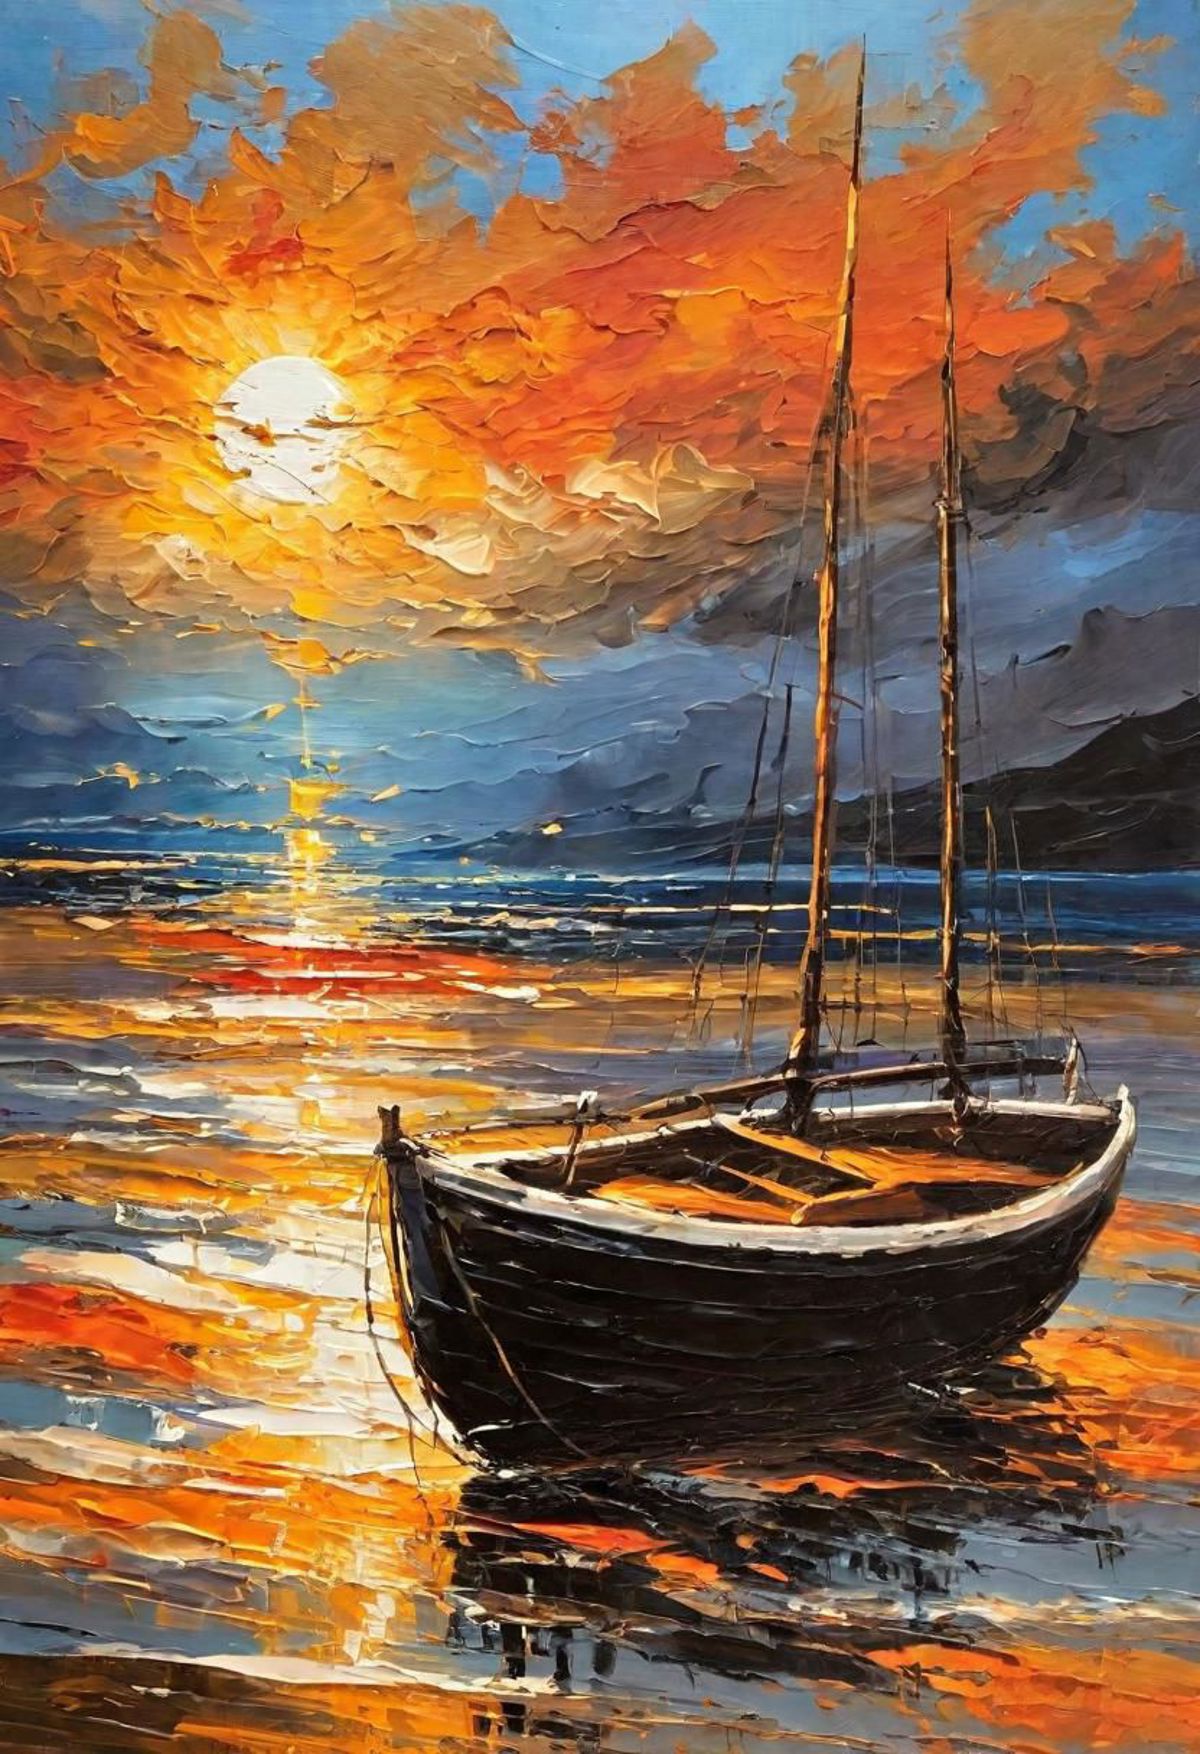 A Painting of a Small Boat on the Water with the Sun Setting in the Background.